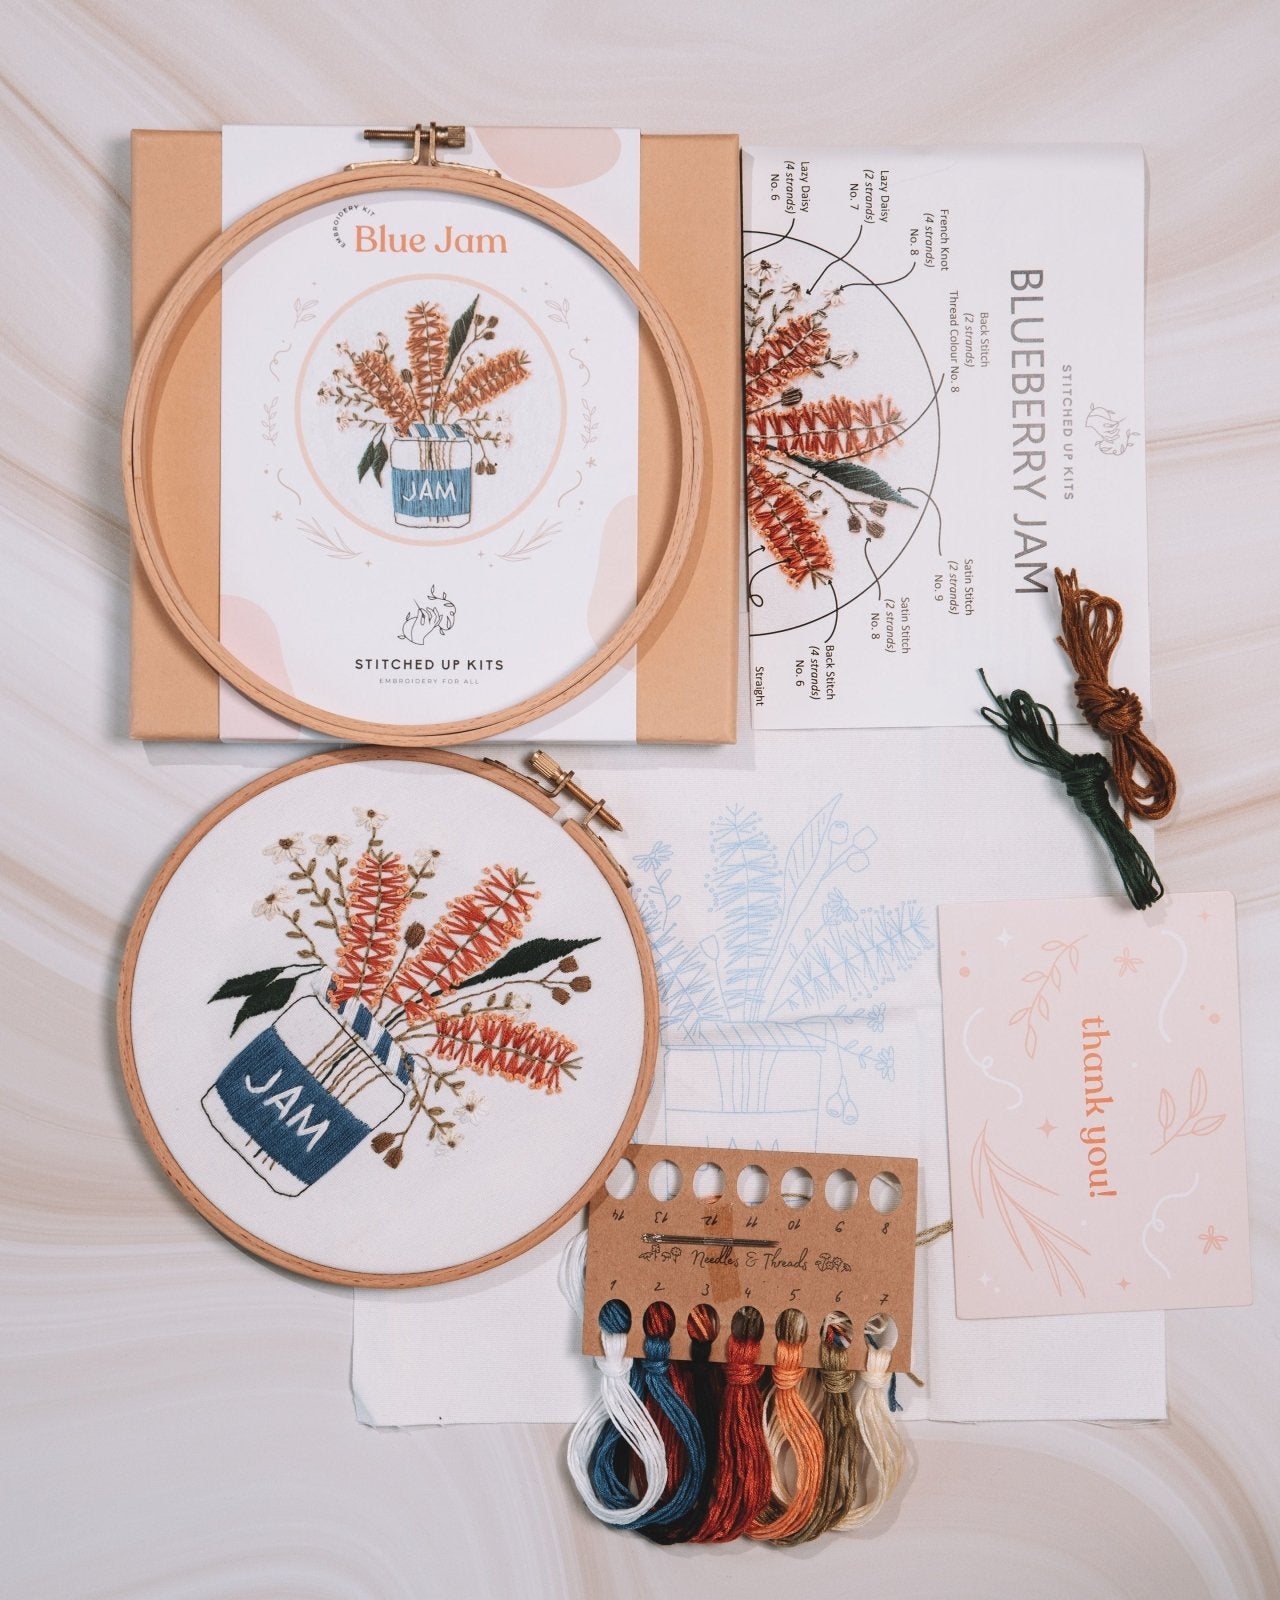 Flat-lay of everything included in the Blue Jam Kit - the gift box, white cotton fabric with cotton, threads numbered on cardboard, and a thank you card